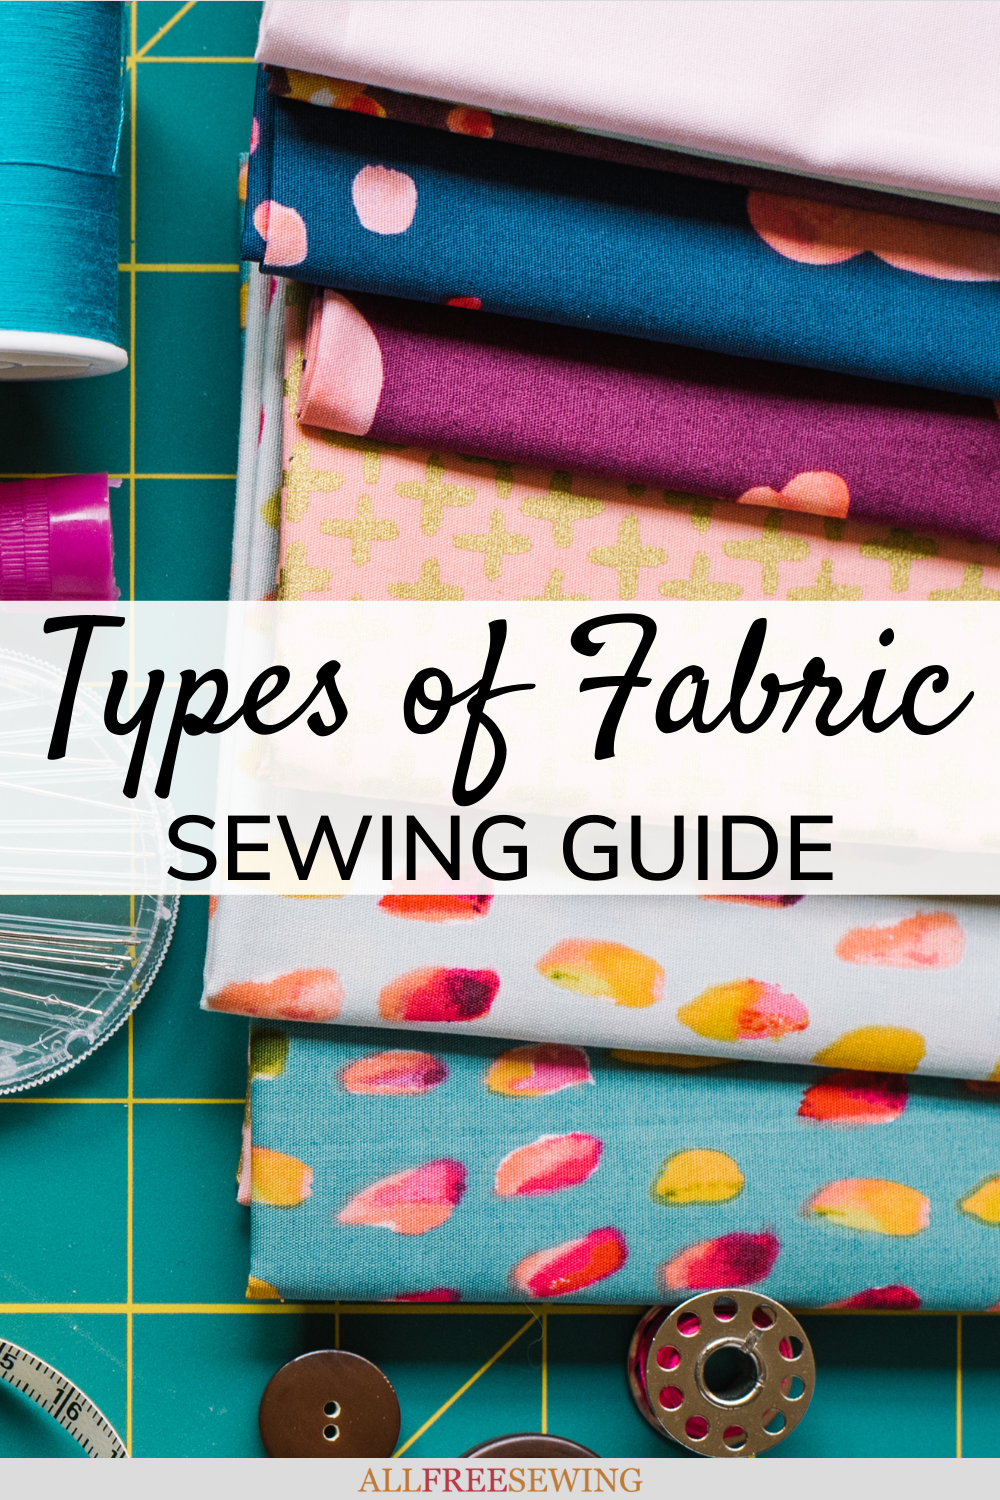 40+ Different Types of Fabric and Their Uses (With Pictures